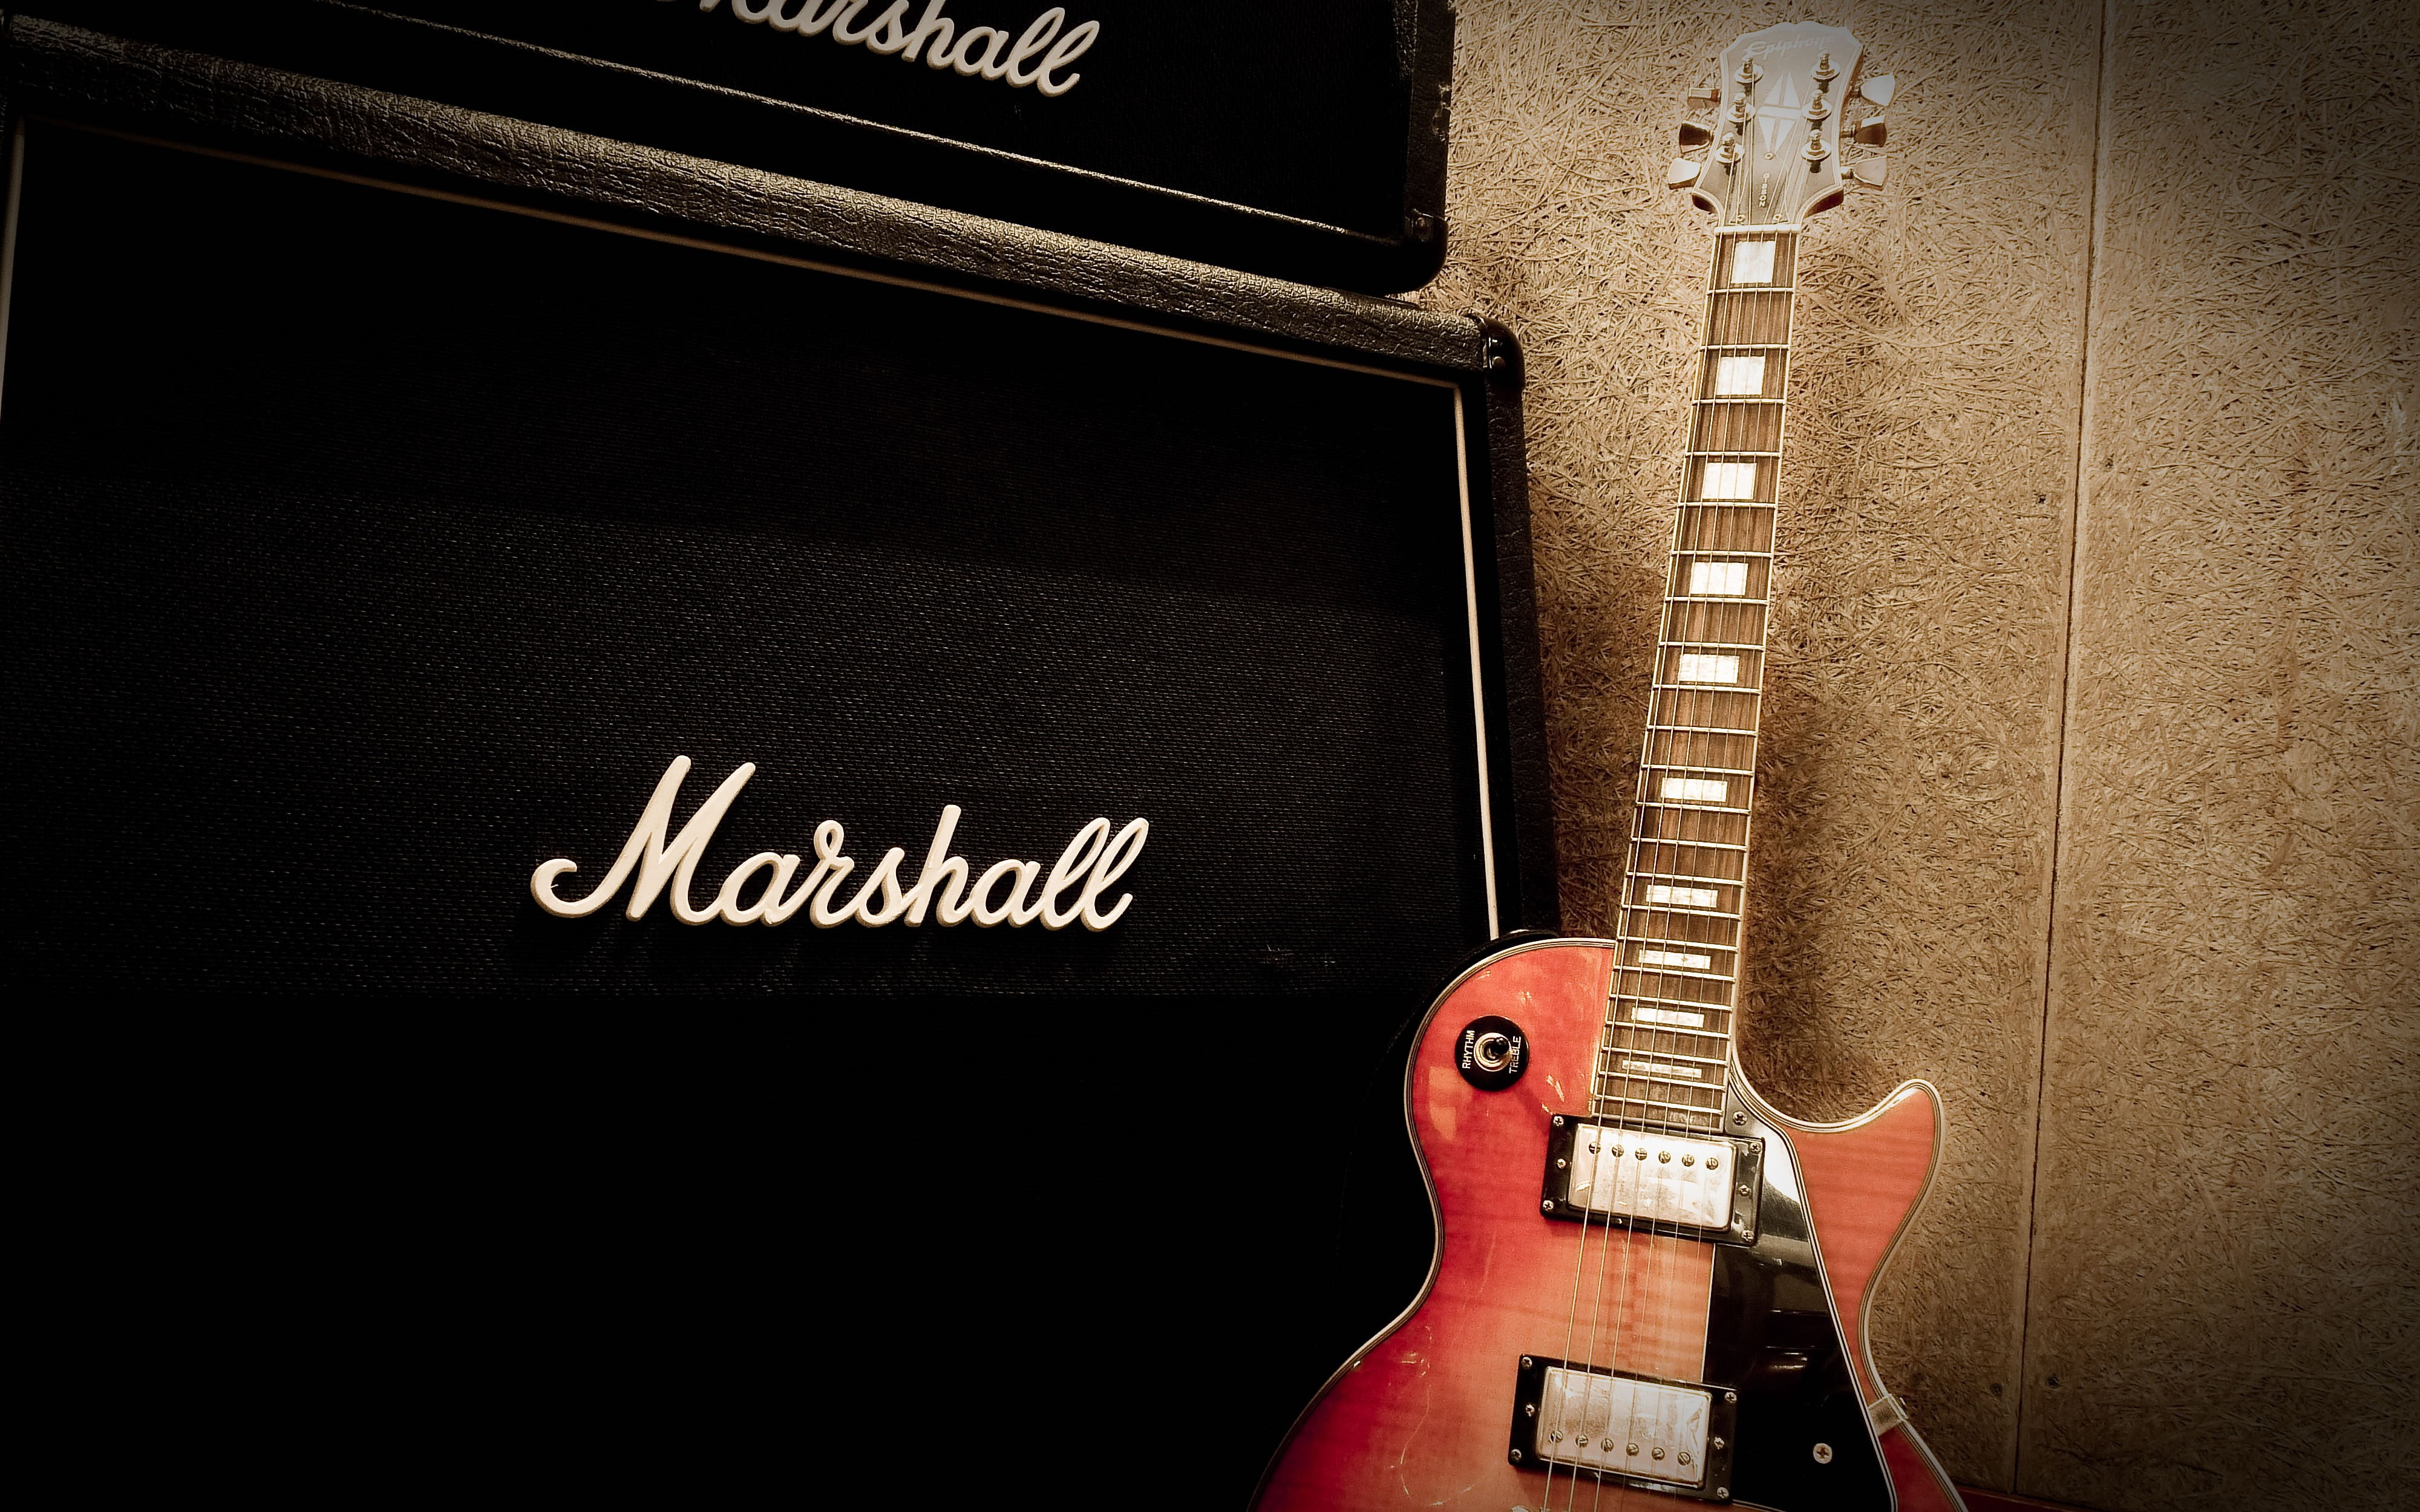 black Marshall guitar amplifier and red electric guitar, musical instrument